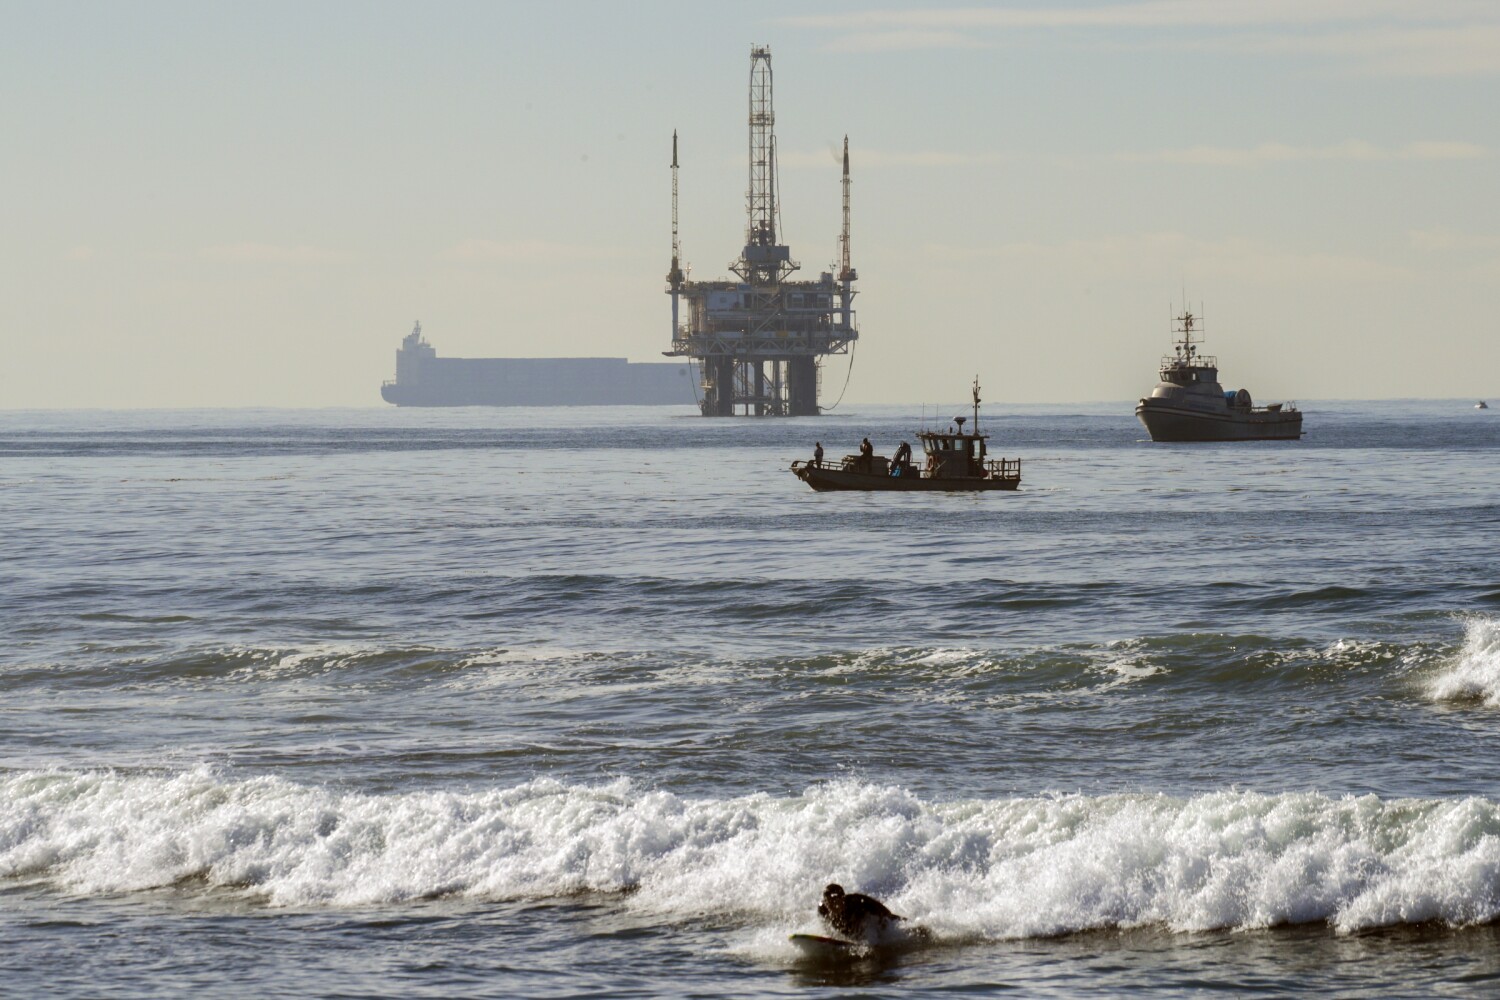 California-based oil company identified as source of latest sheen off Orange County coast